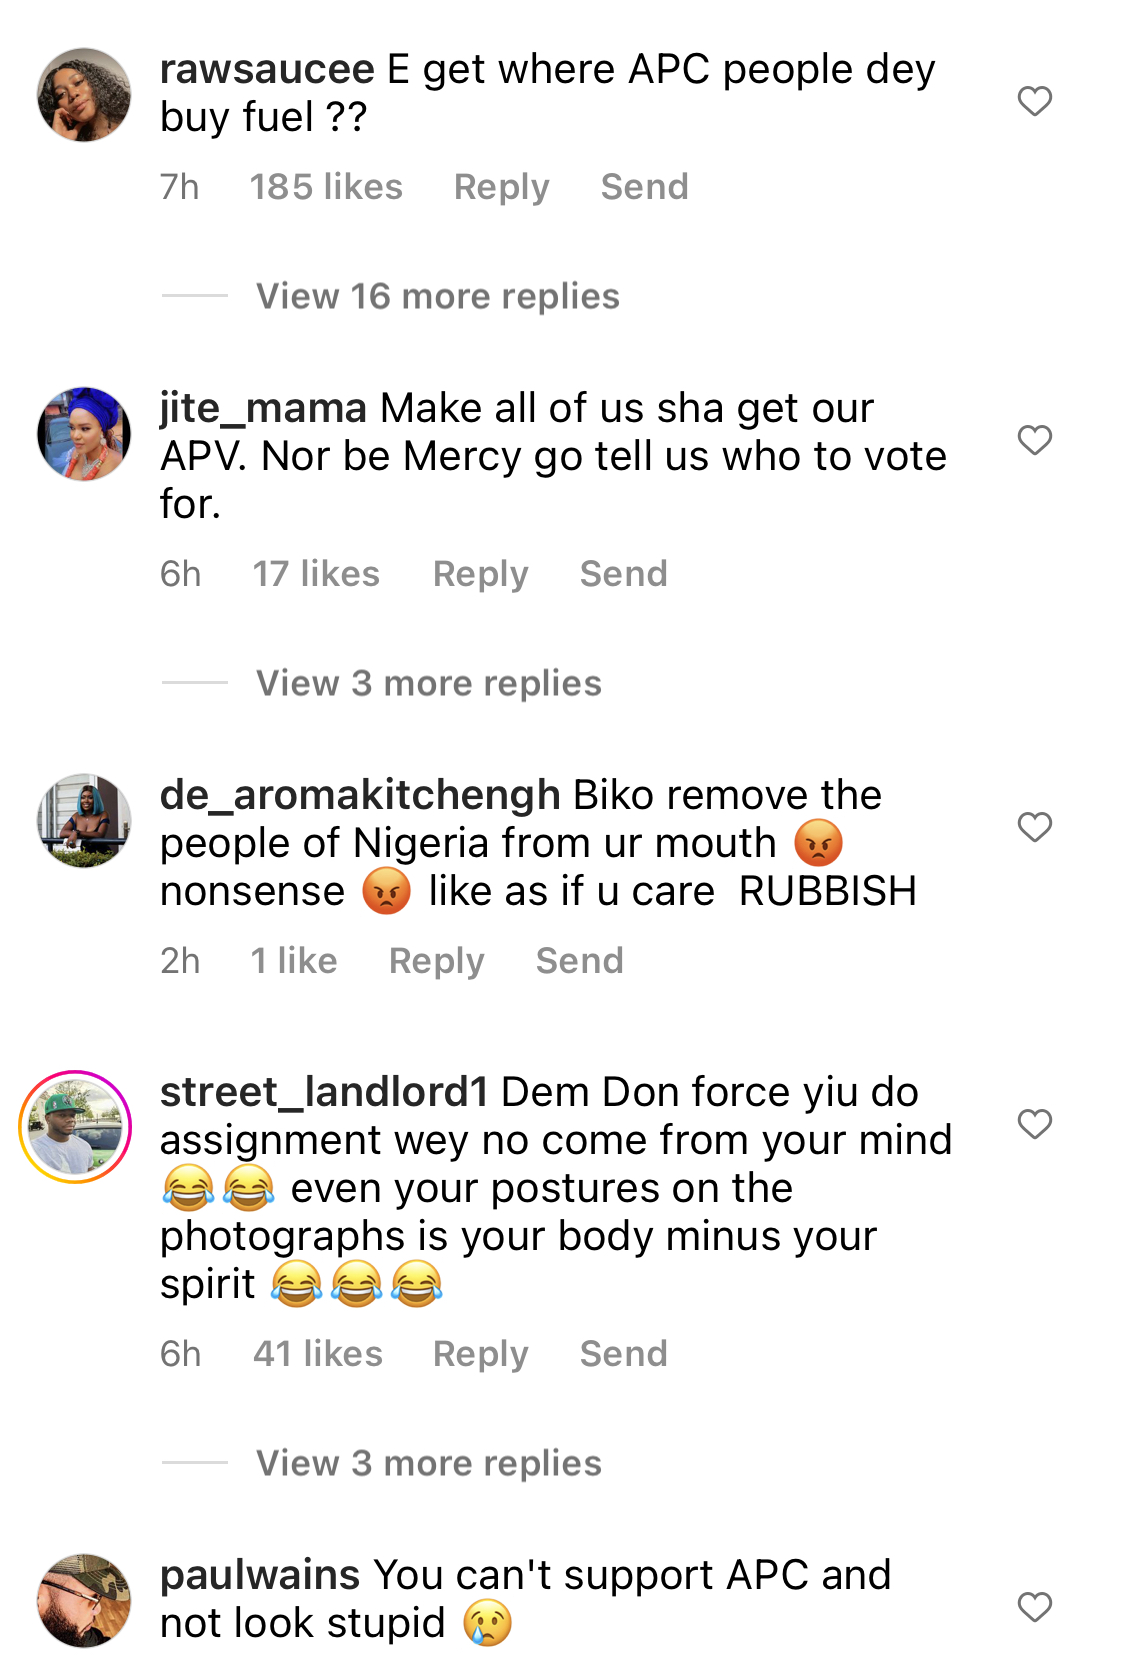 I’m confident in the great plans APC has for Nigerians - Actress Mercy Johnson campaigns for Tinubu